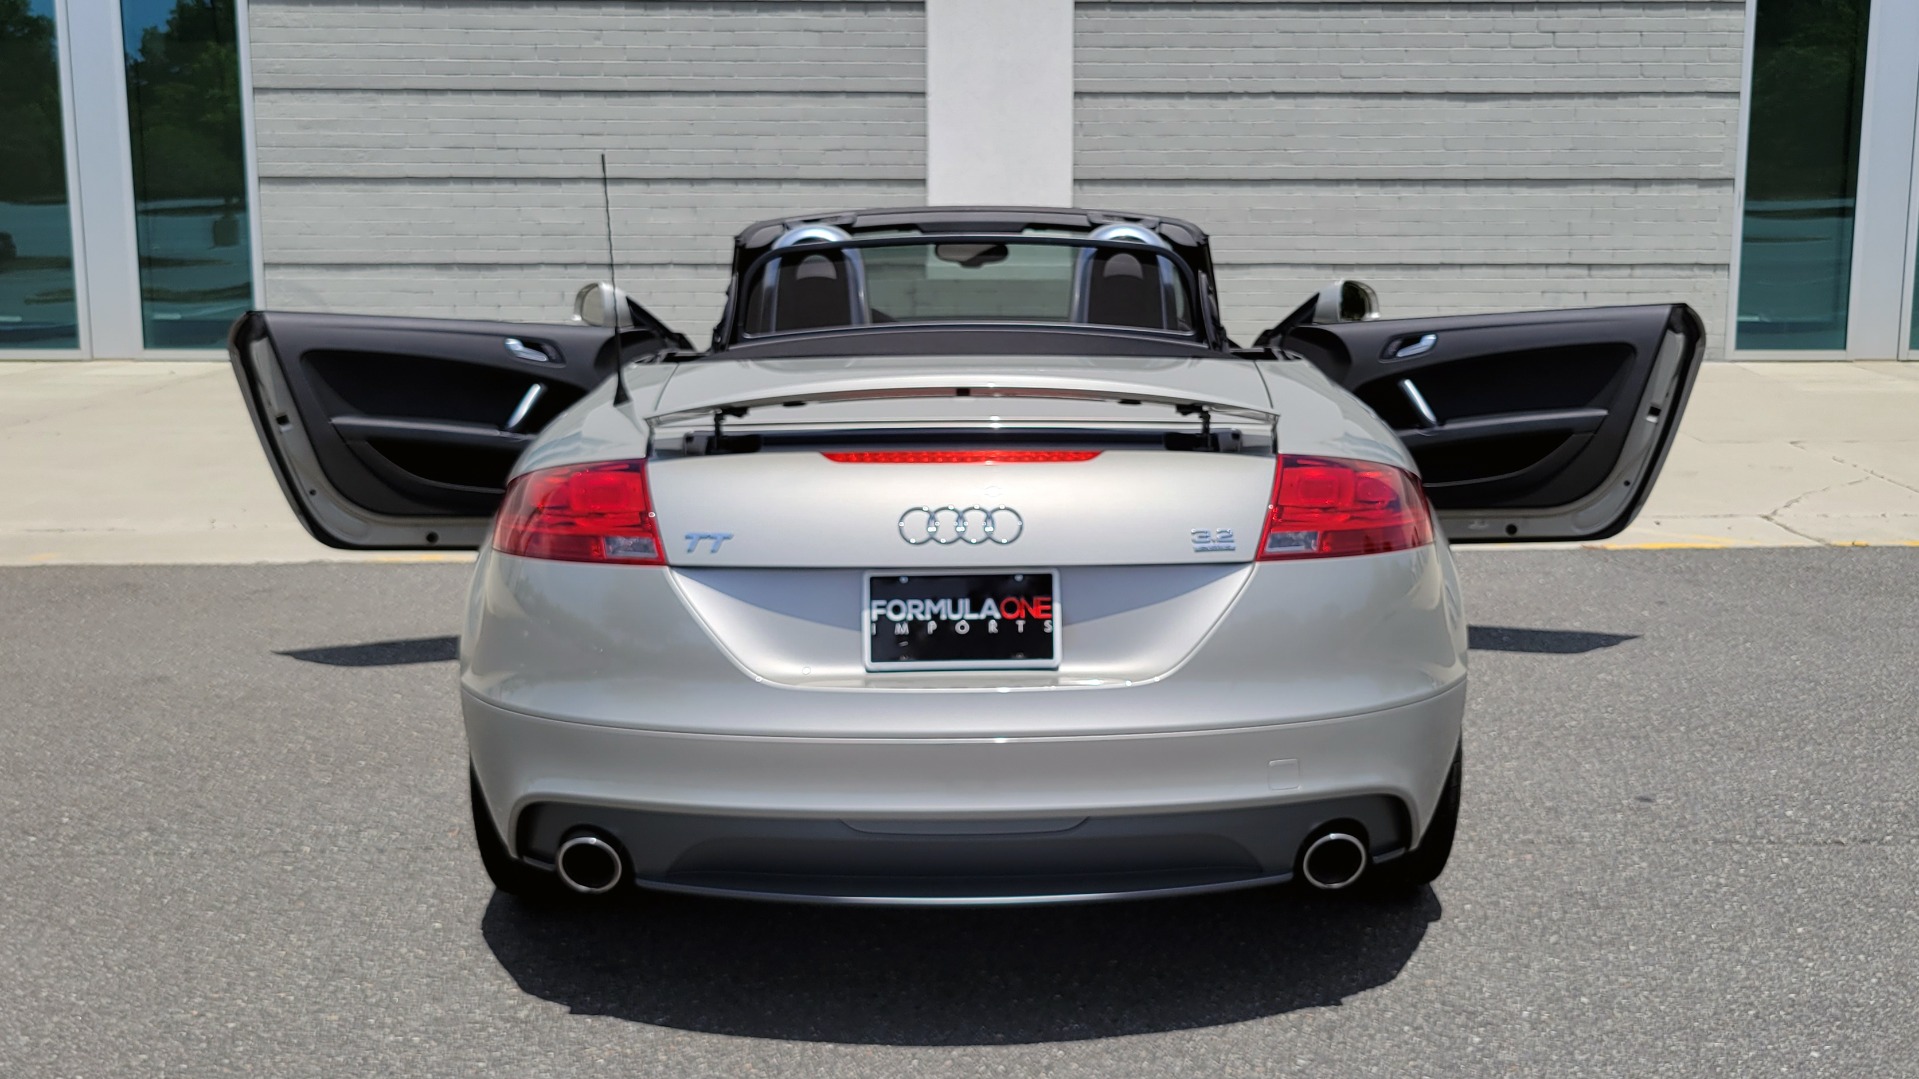 Used 2008 Audi TT 3.2L CONVERTIBLE / MANUAL / 19IN WHEELS / LOW MILES for sale Sold at Formula Imports in Charlotte NC 28227 11